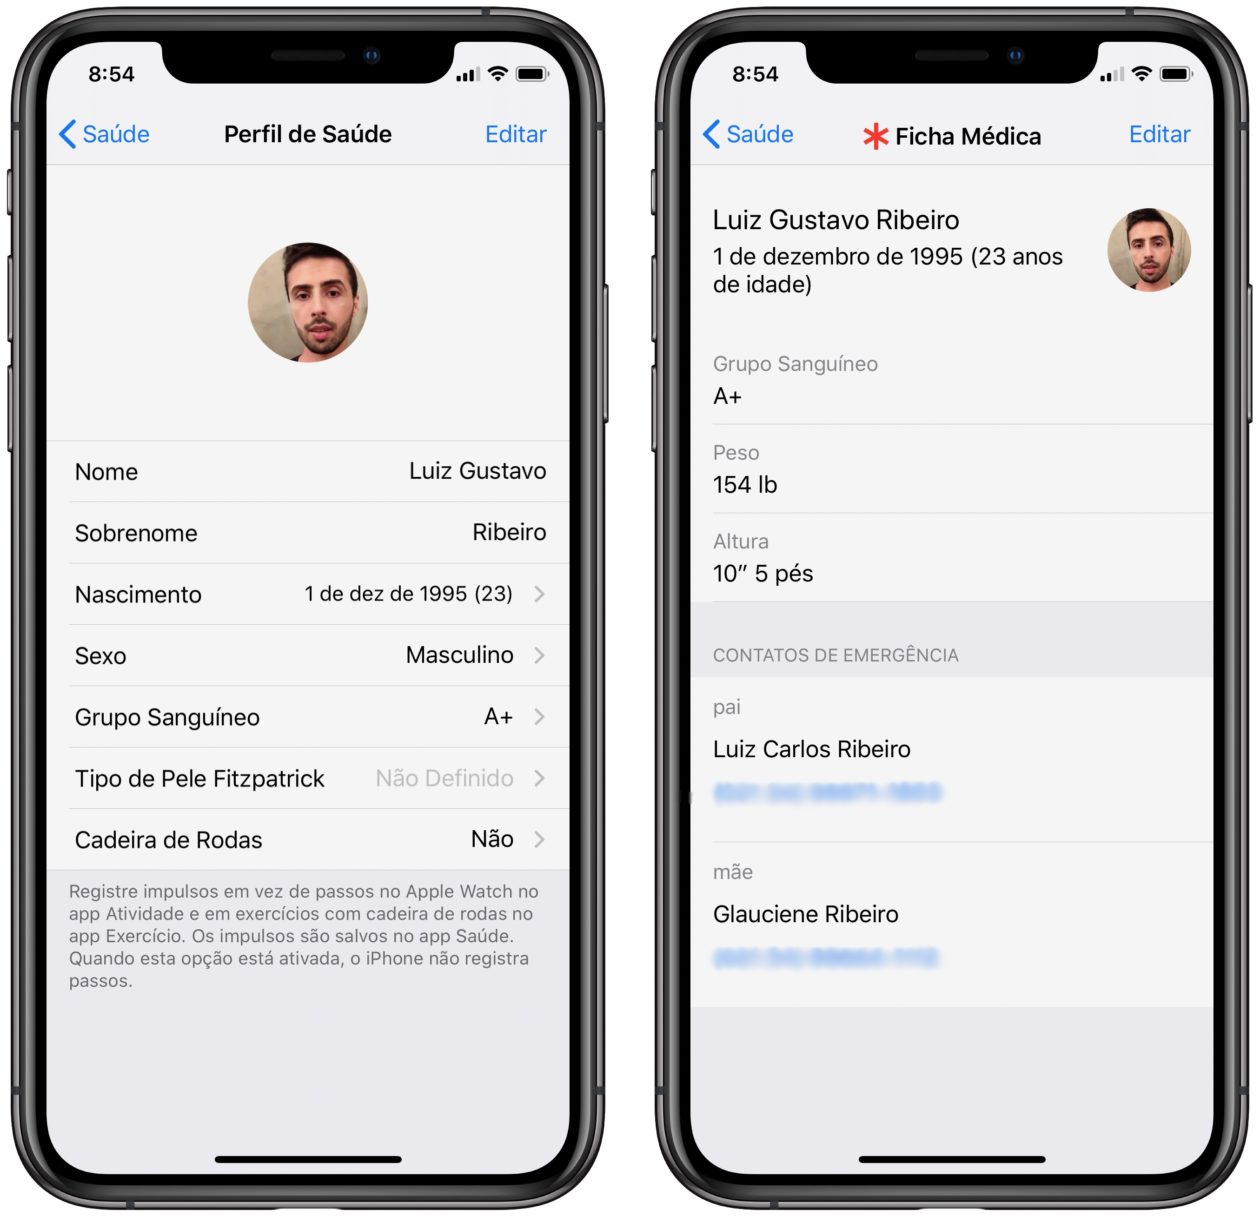 Medical Record on iPhone